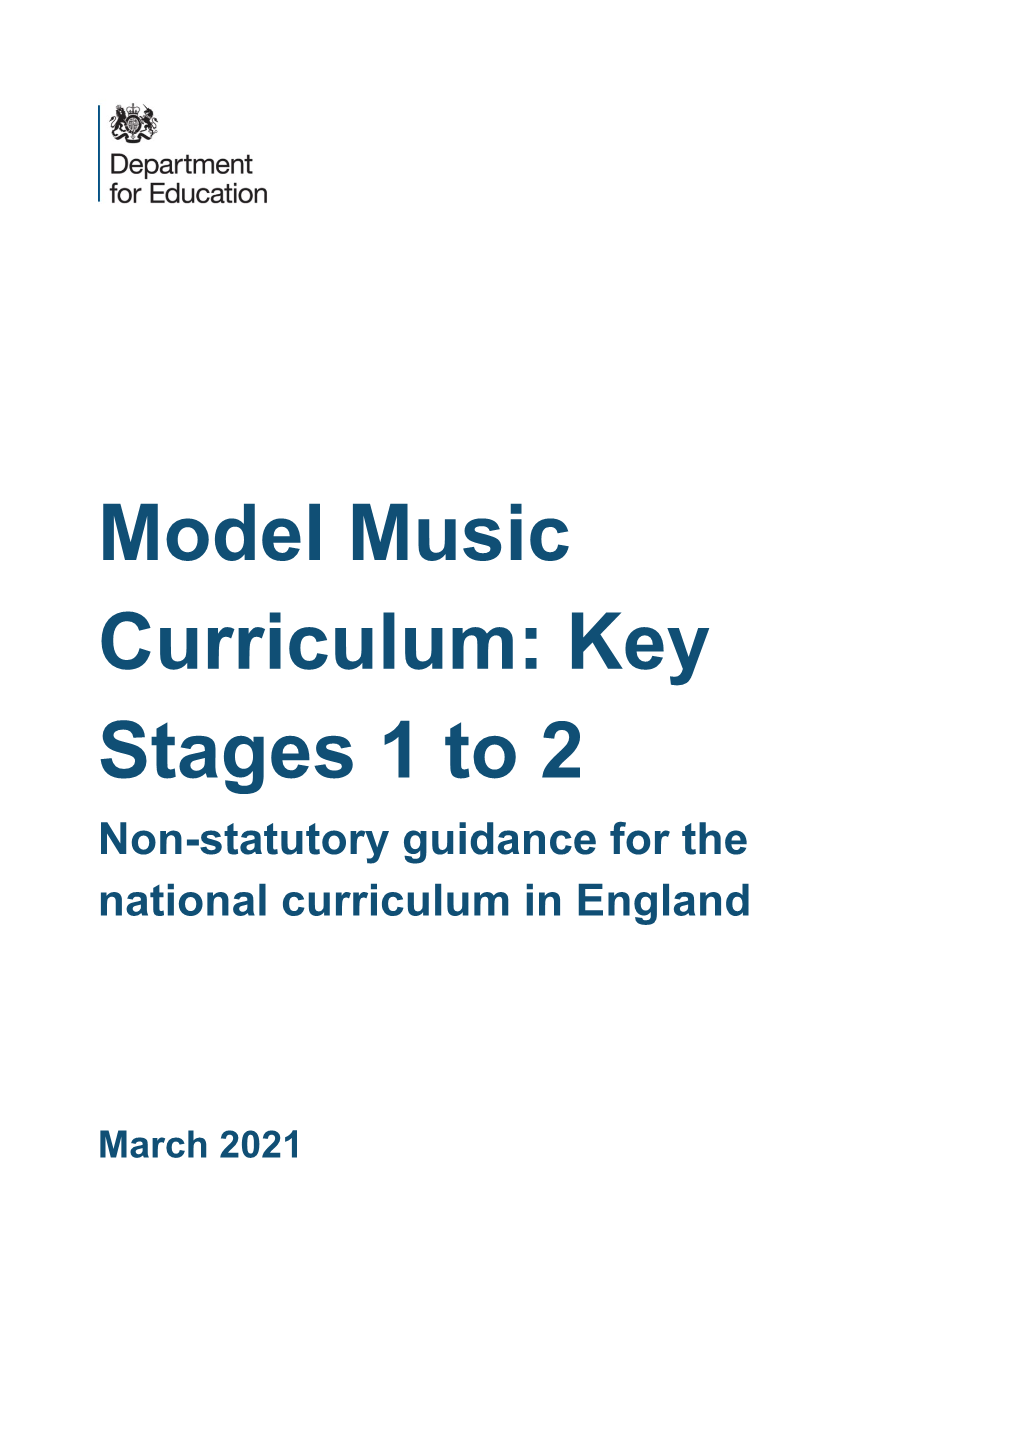 Model Music Curriculum: Key Stages 1 to 2 Non-Statutory Guidance for the National Curriculum in England